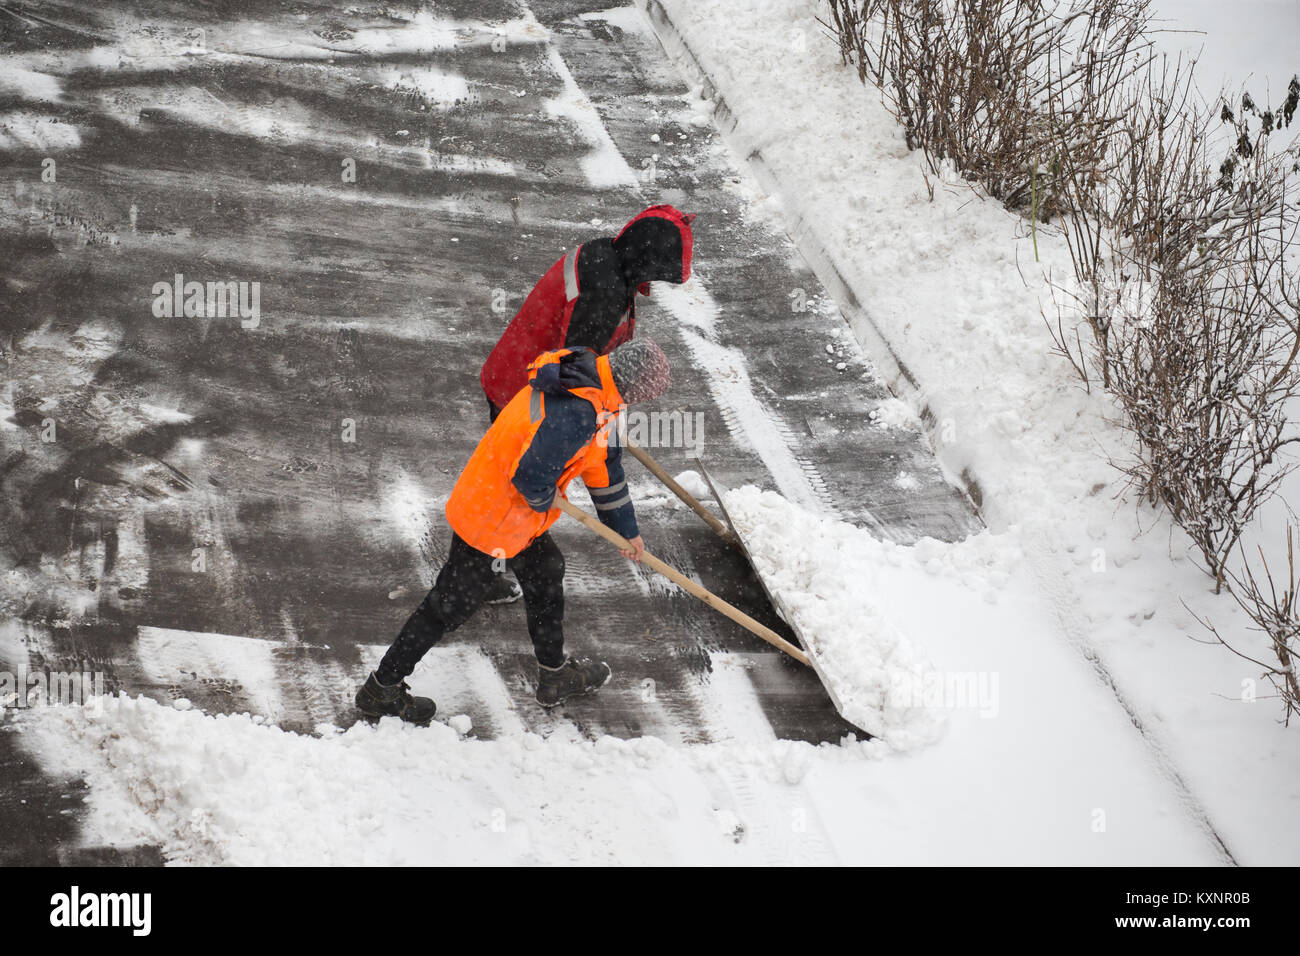 Moscow, Russia. 11th January, 2018.  Janitors shovel snow off the path in a residential area, in the city of Moscow during a heavy snowfall. Credit: Victor Vytolskiy/Alamy Live News Stock Photo